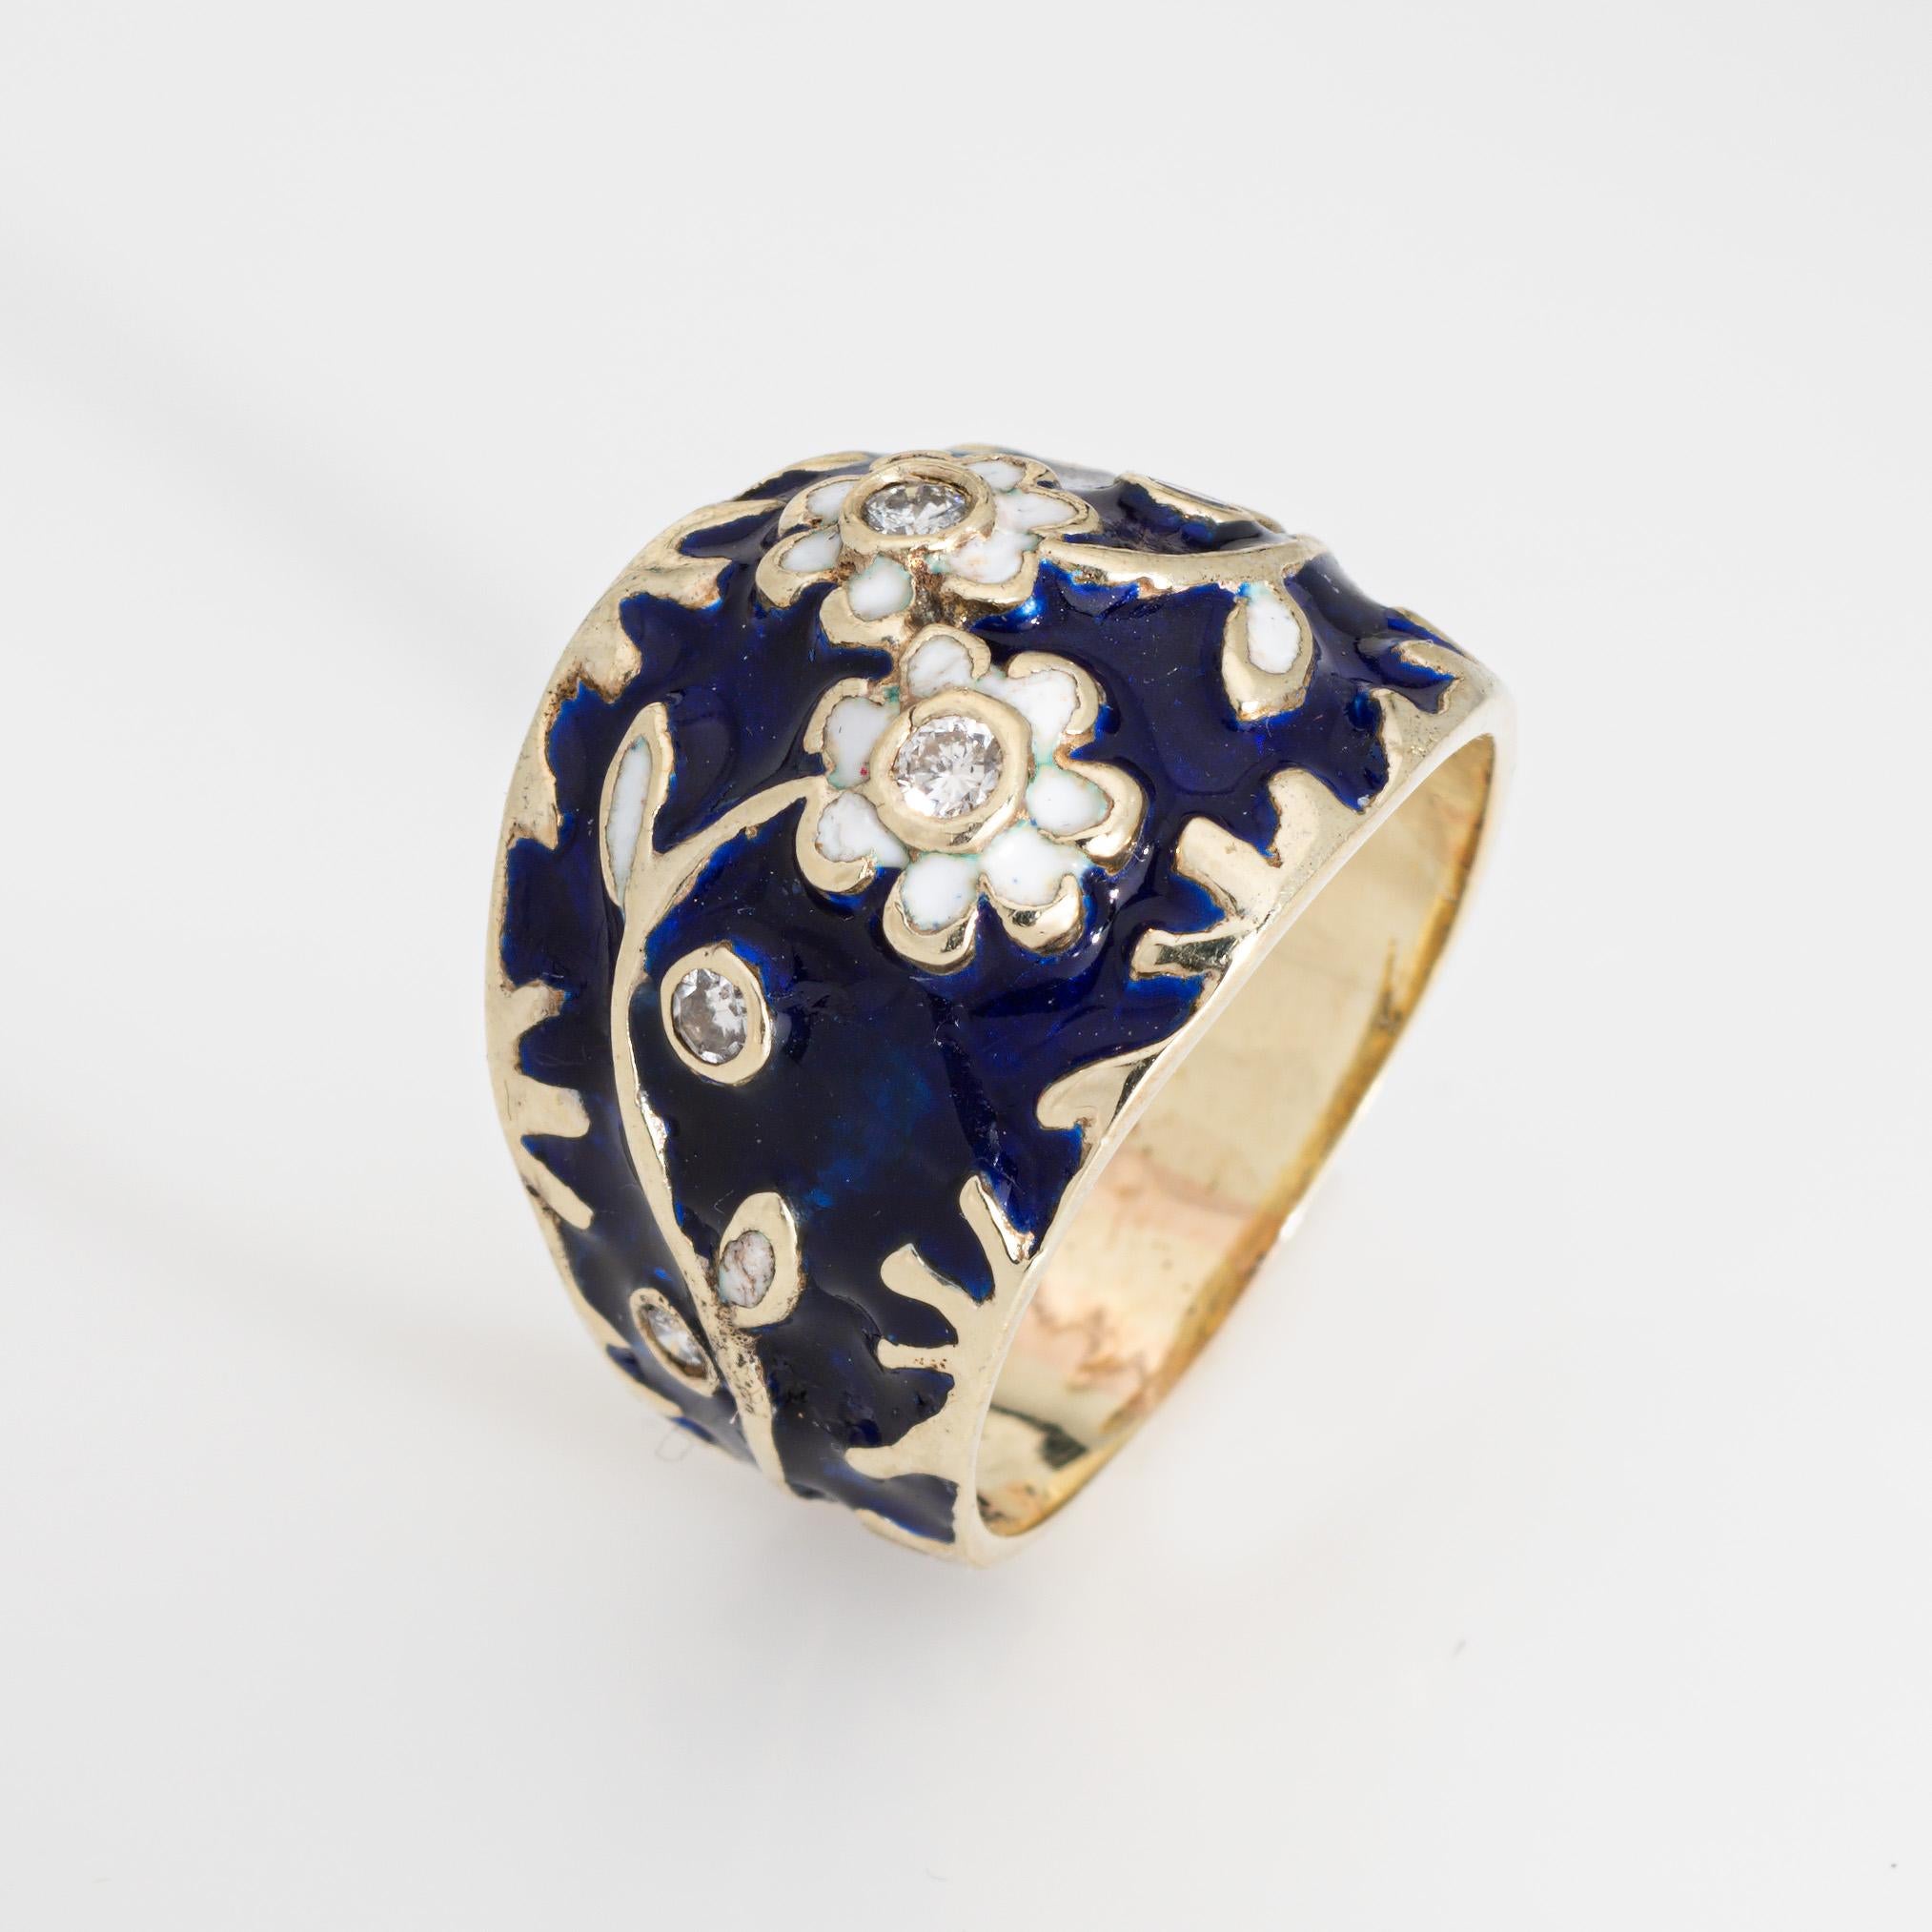 Stylish diamond enamel flower ring crafted in 10 karat yellow gold (circa 1960s to 1970s).

Six diamonds total an estimated 0.05 carats (estimated at H-I color and SI1-I1 clarity).

Navy blue enamel serves as the backdrop to a beautiful diamond set